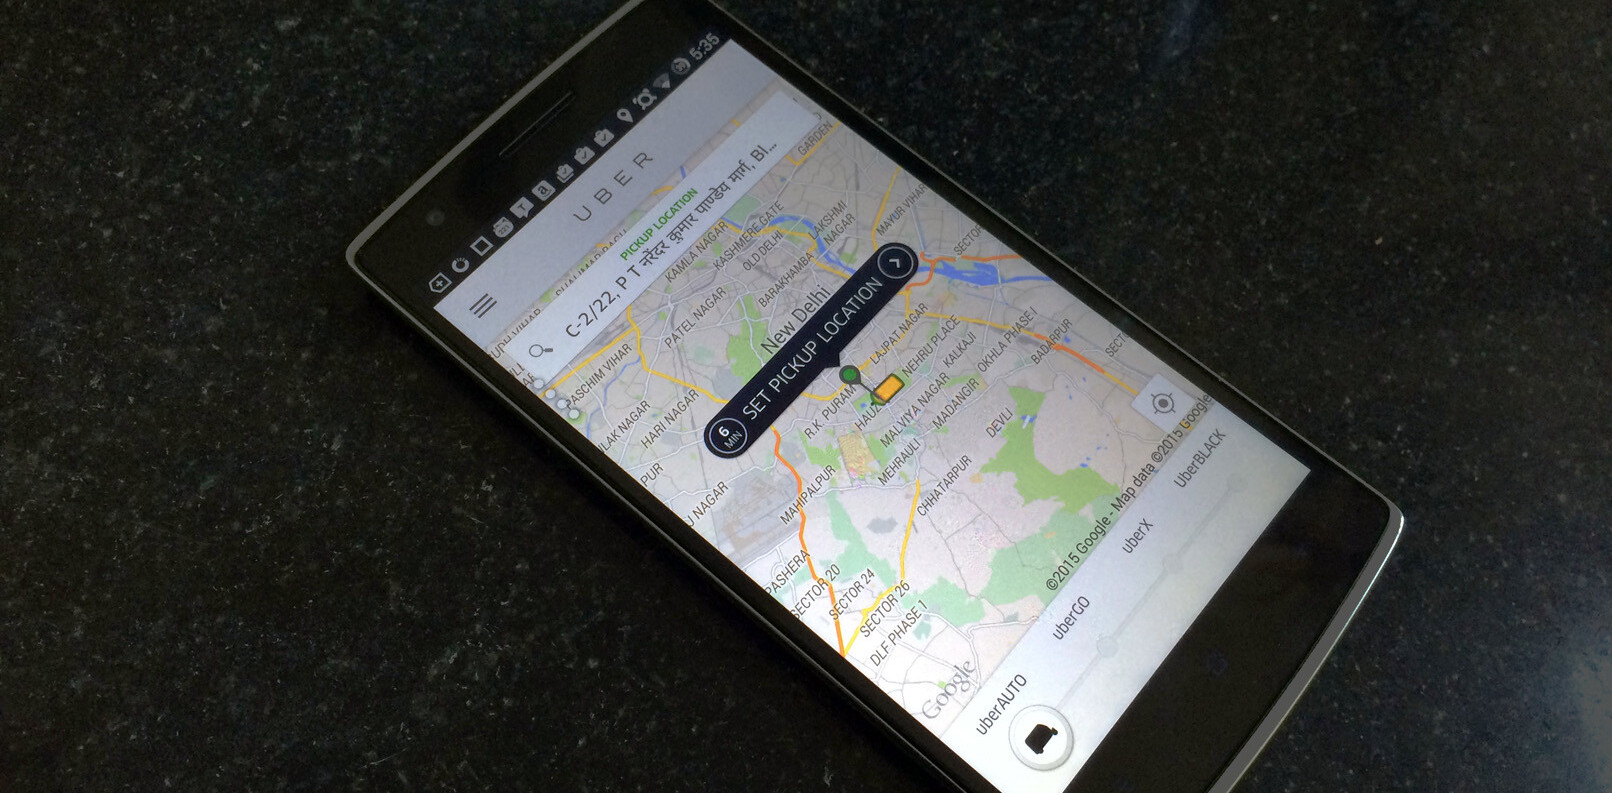 Uber’s getting sued again, this time in Ontario